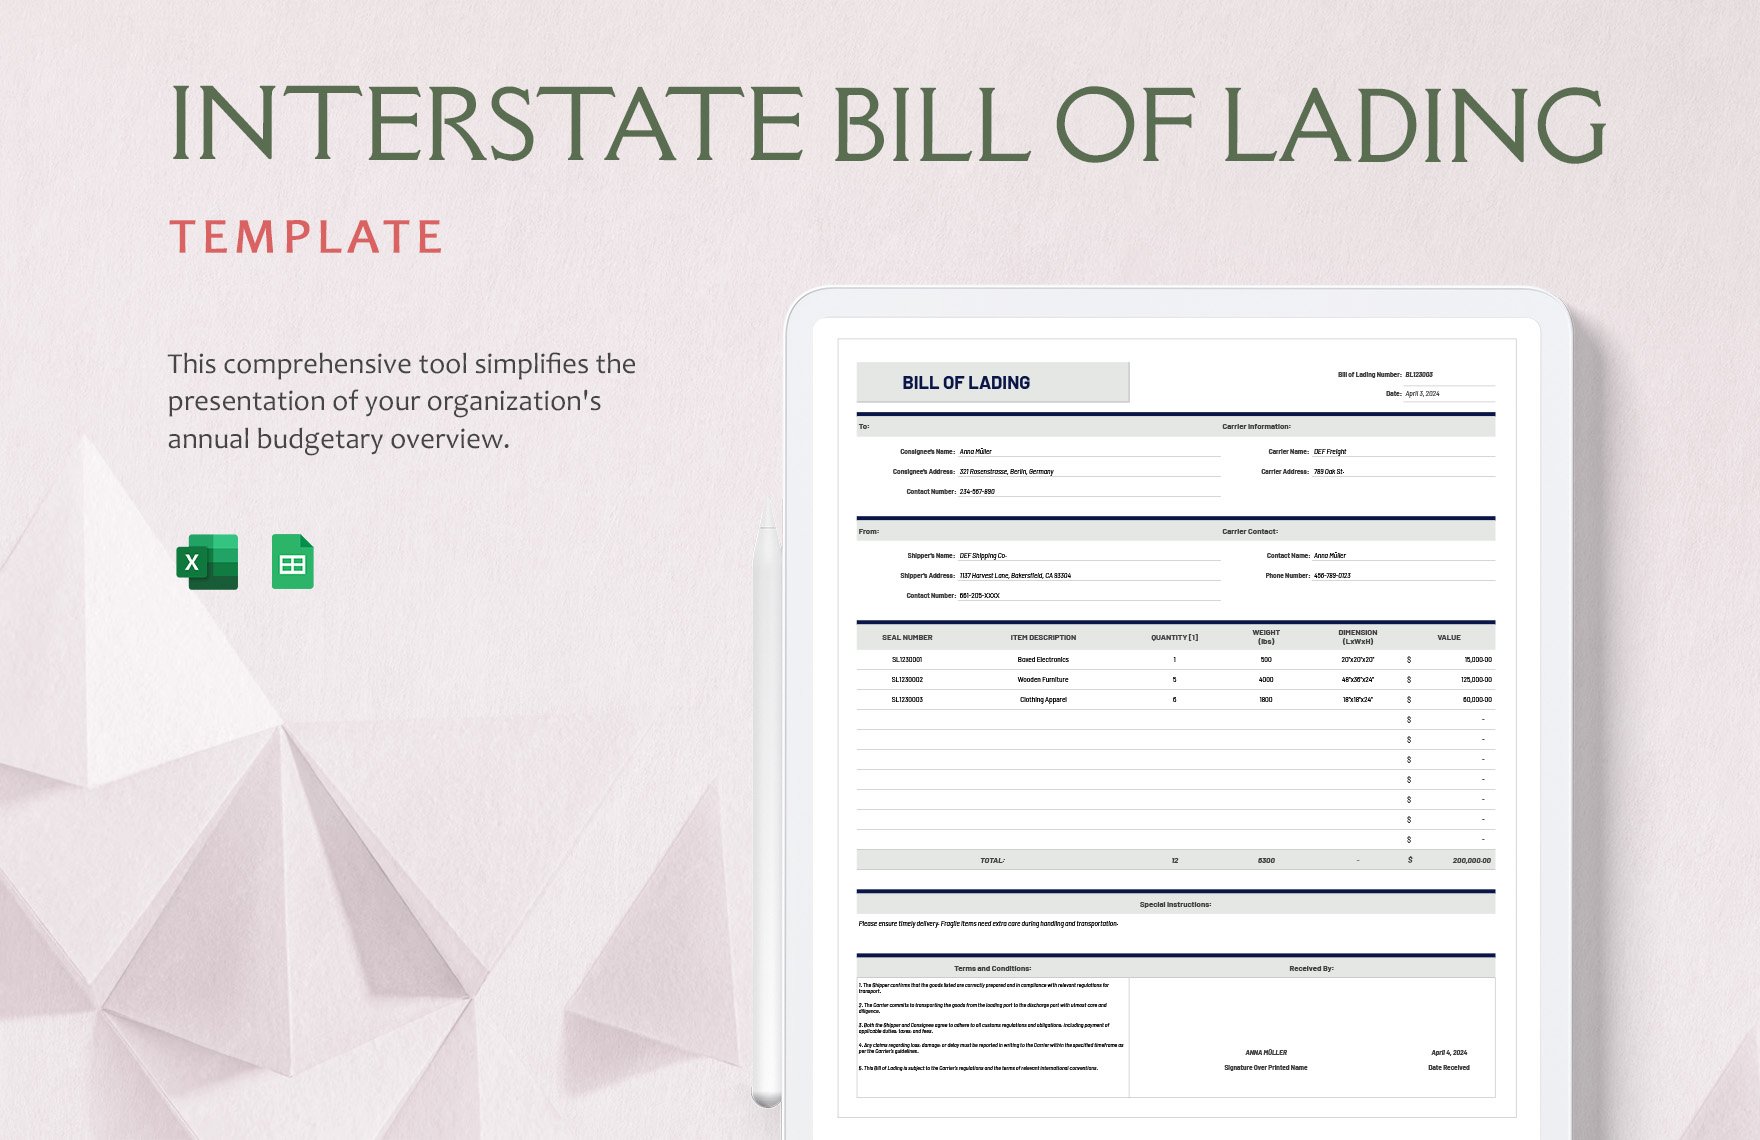 Interstate Bill of Lading Template